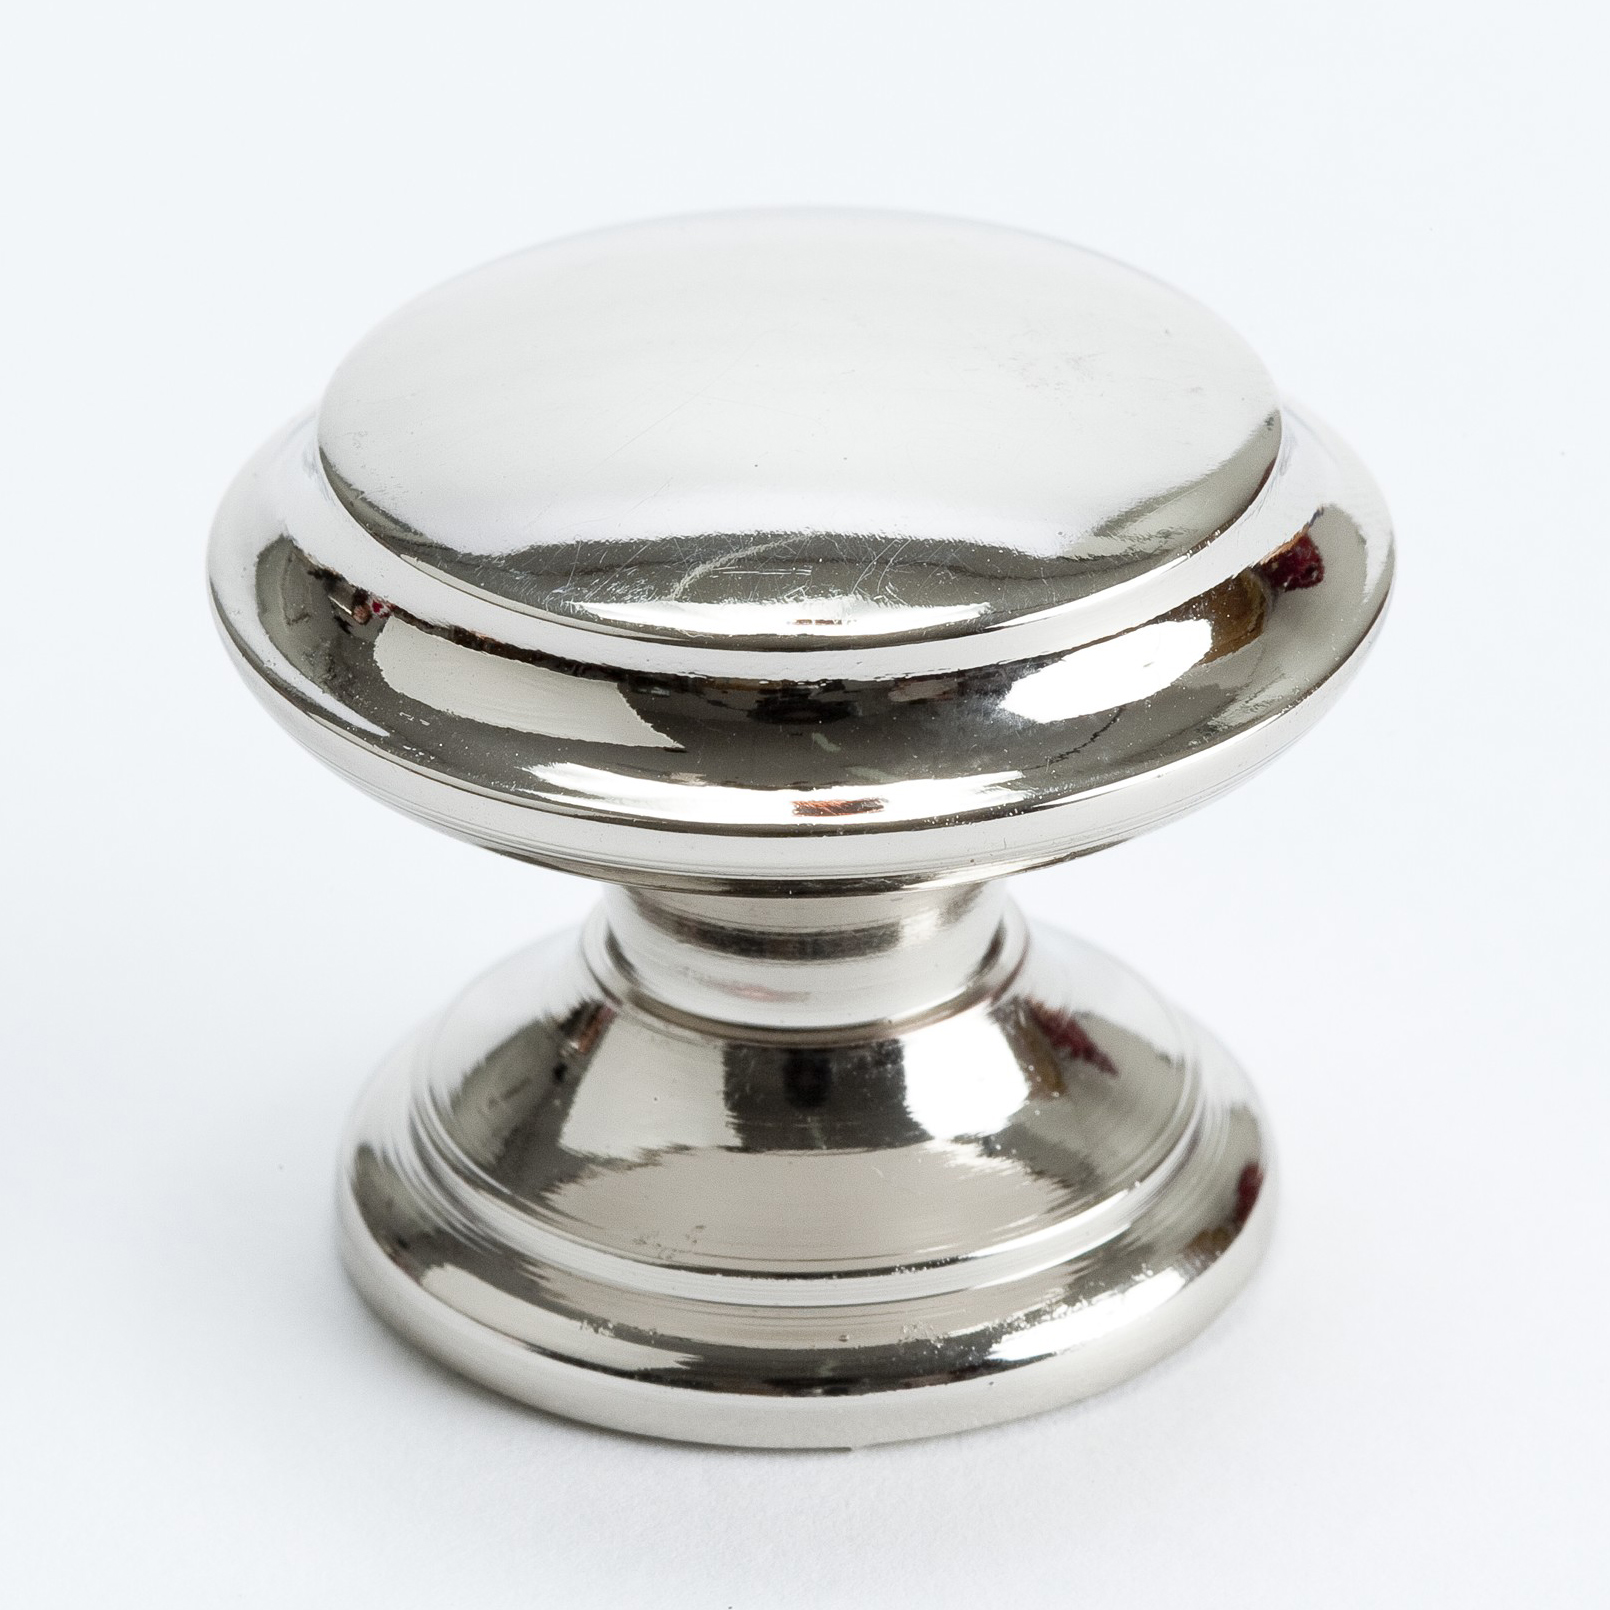 Designers Group 10 1-3/8" Round Knob in Polished Nickel